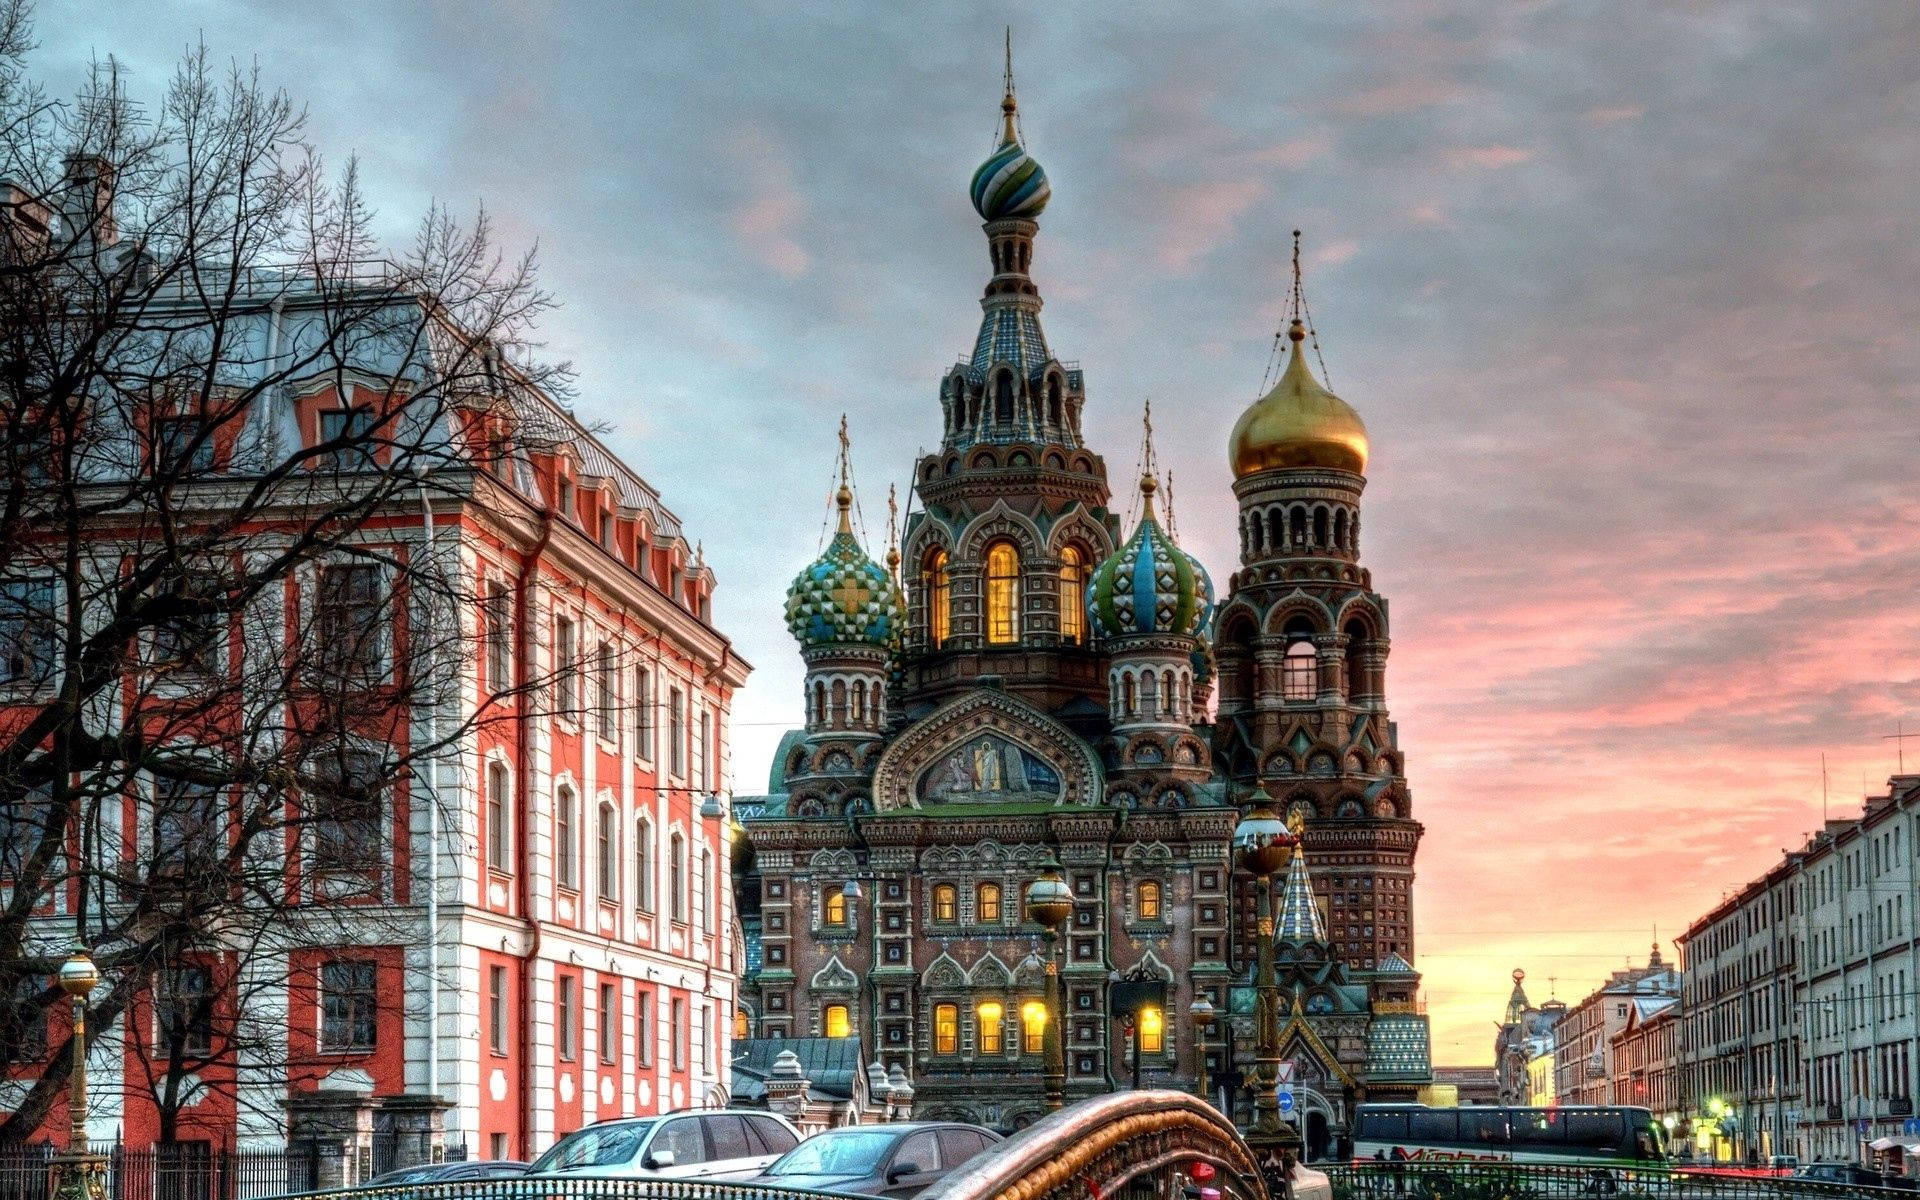 ‘The Magical Street Attractions of Saint Petersburg, Russia’ Wallpaper